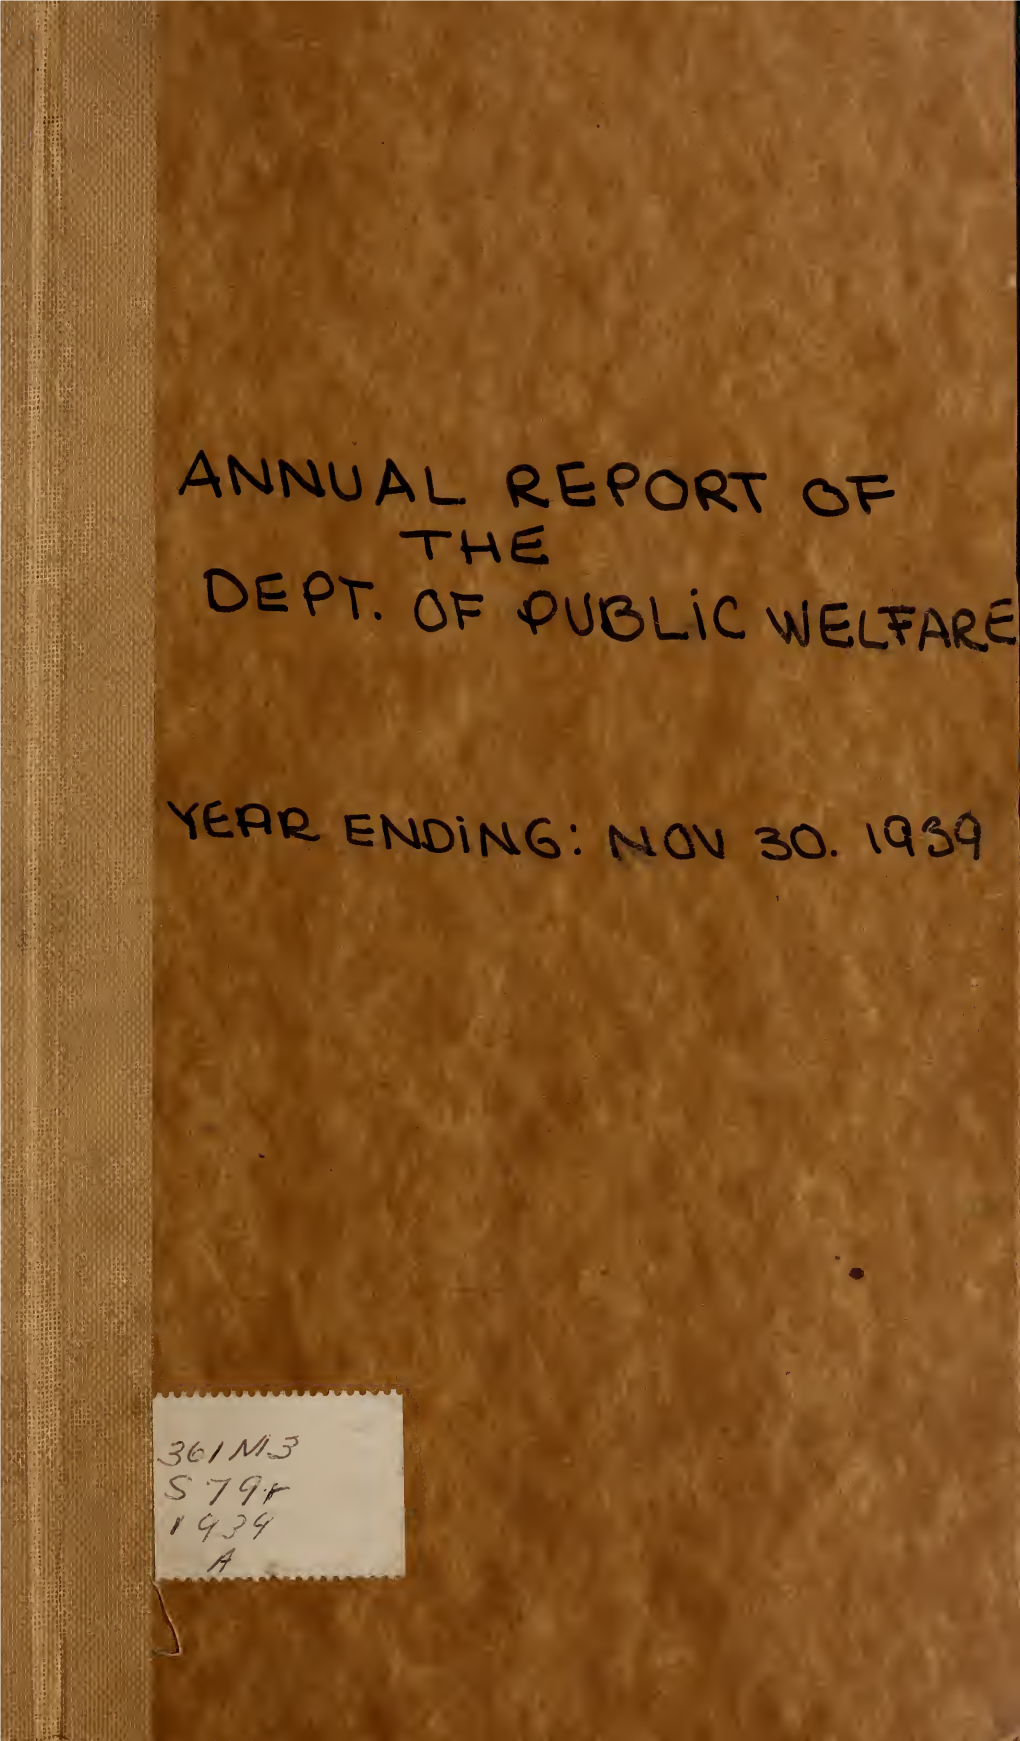 Annual Report of the Department of Public Welfare. Year Ending: Nov